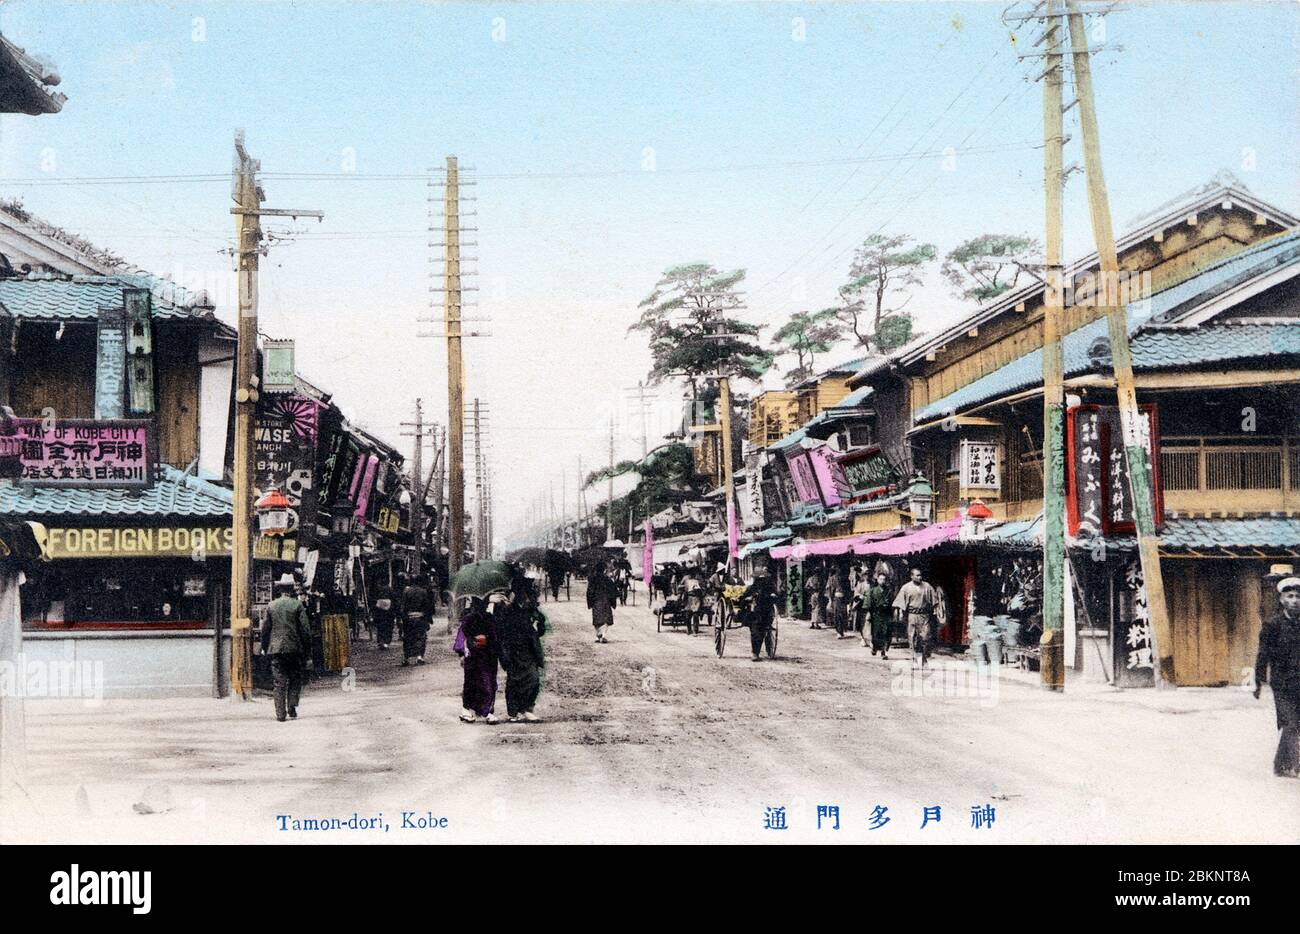 [ 1900s Japan - Japanese Shopping Street, Kobe ] —   Tamondori (多聞通) in Kobe, Hyogo Prefecture as seen from Aoioibashi (相生橋).  The pine trees on the right locate Minatogawa Jinja. The shop on the left advertises for foreign books and a map of Kobe City.  20th century vintage postcard. Stock Photo